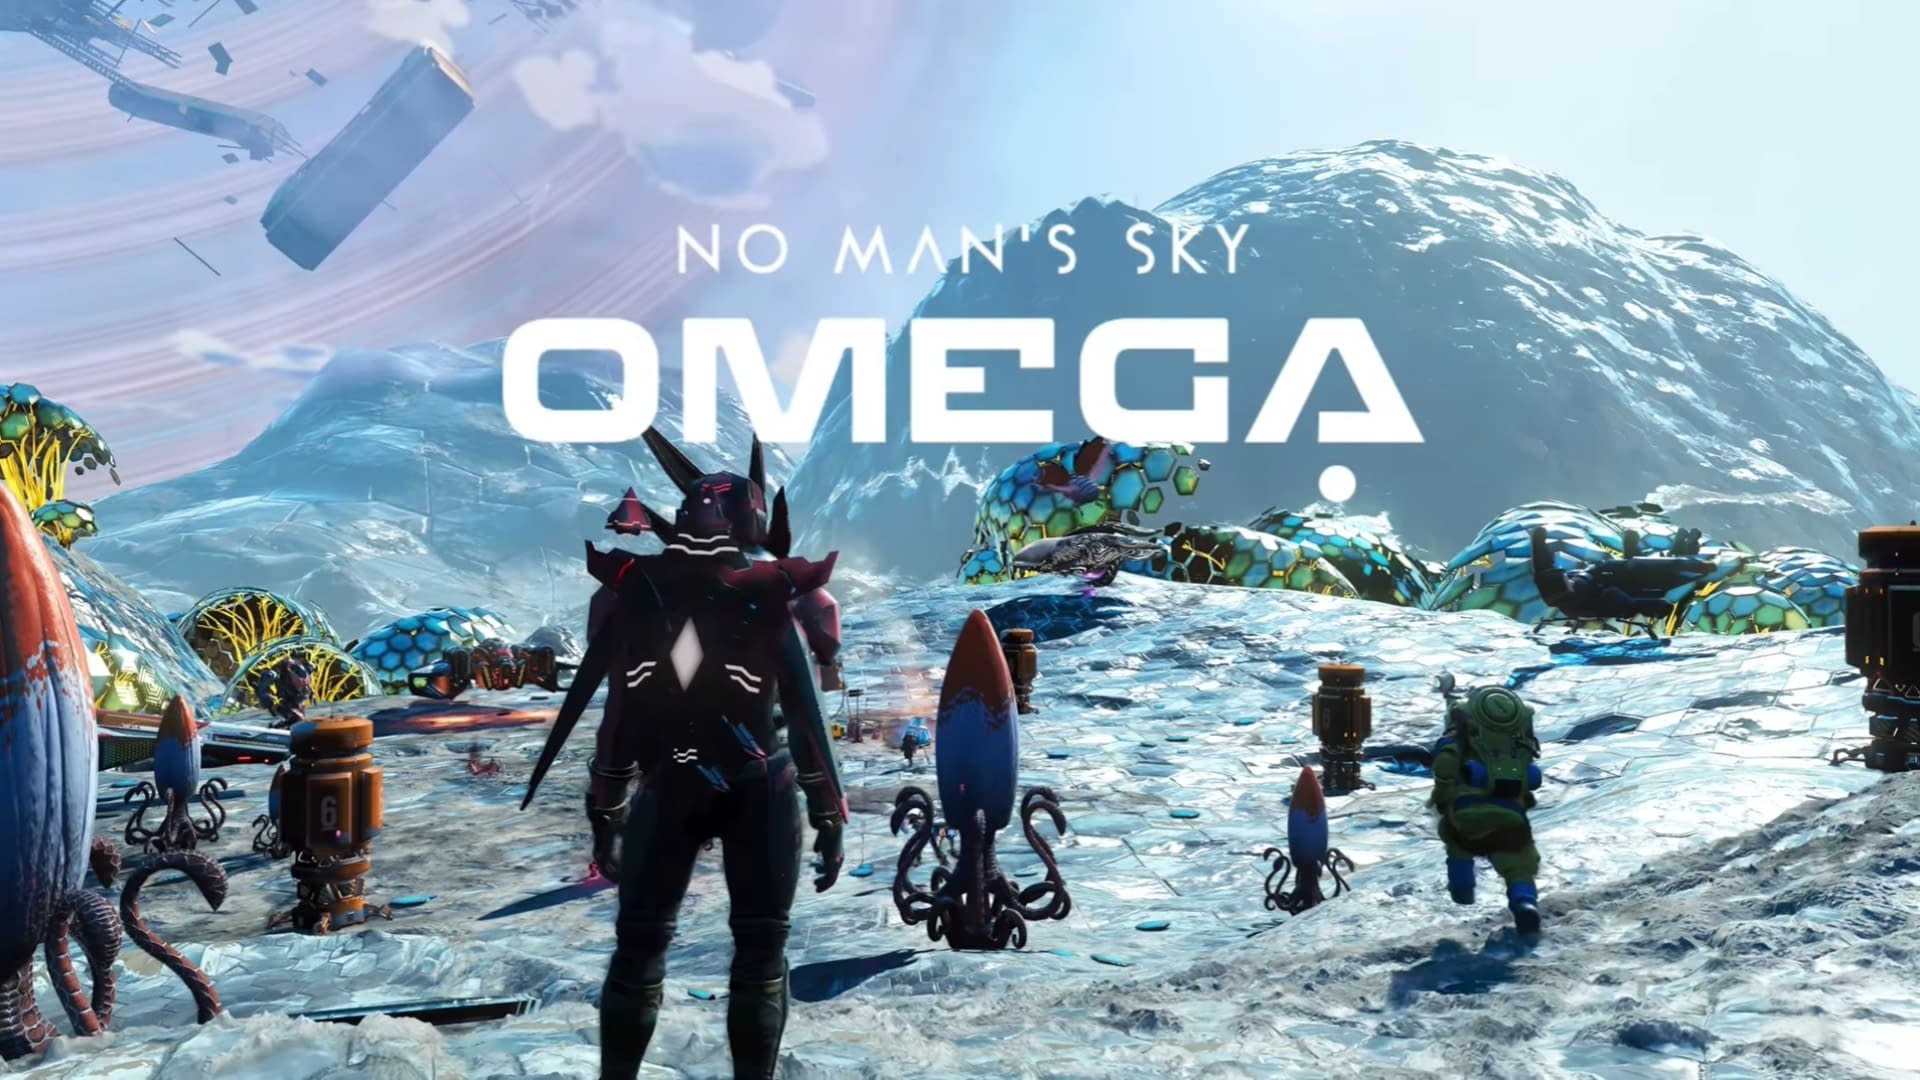 Giant Omega Update for No Man’s Sky Published